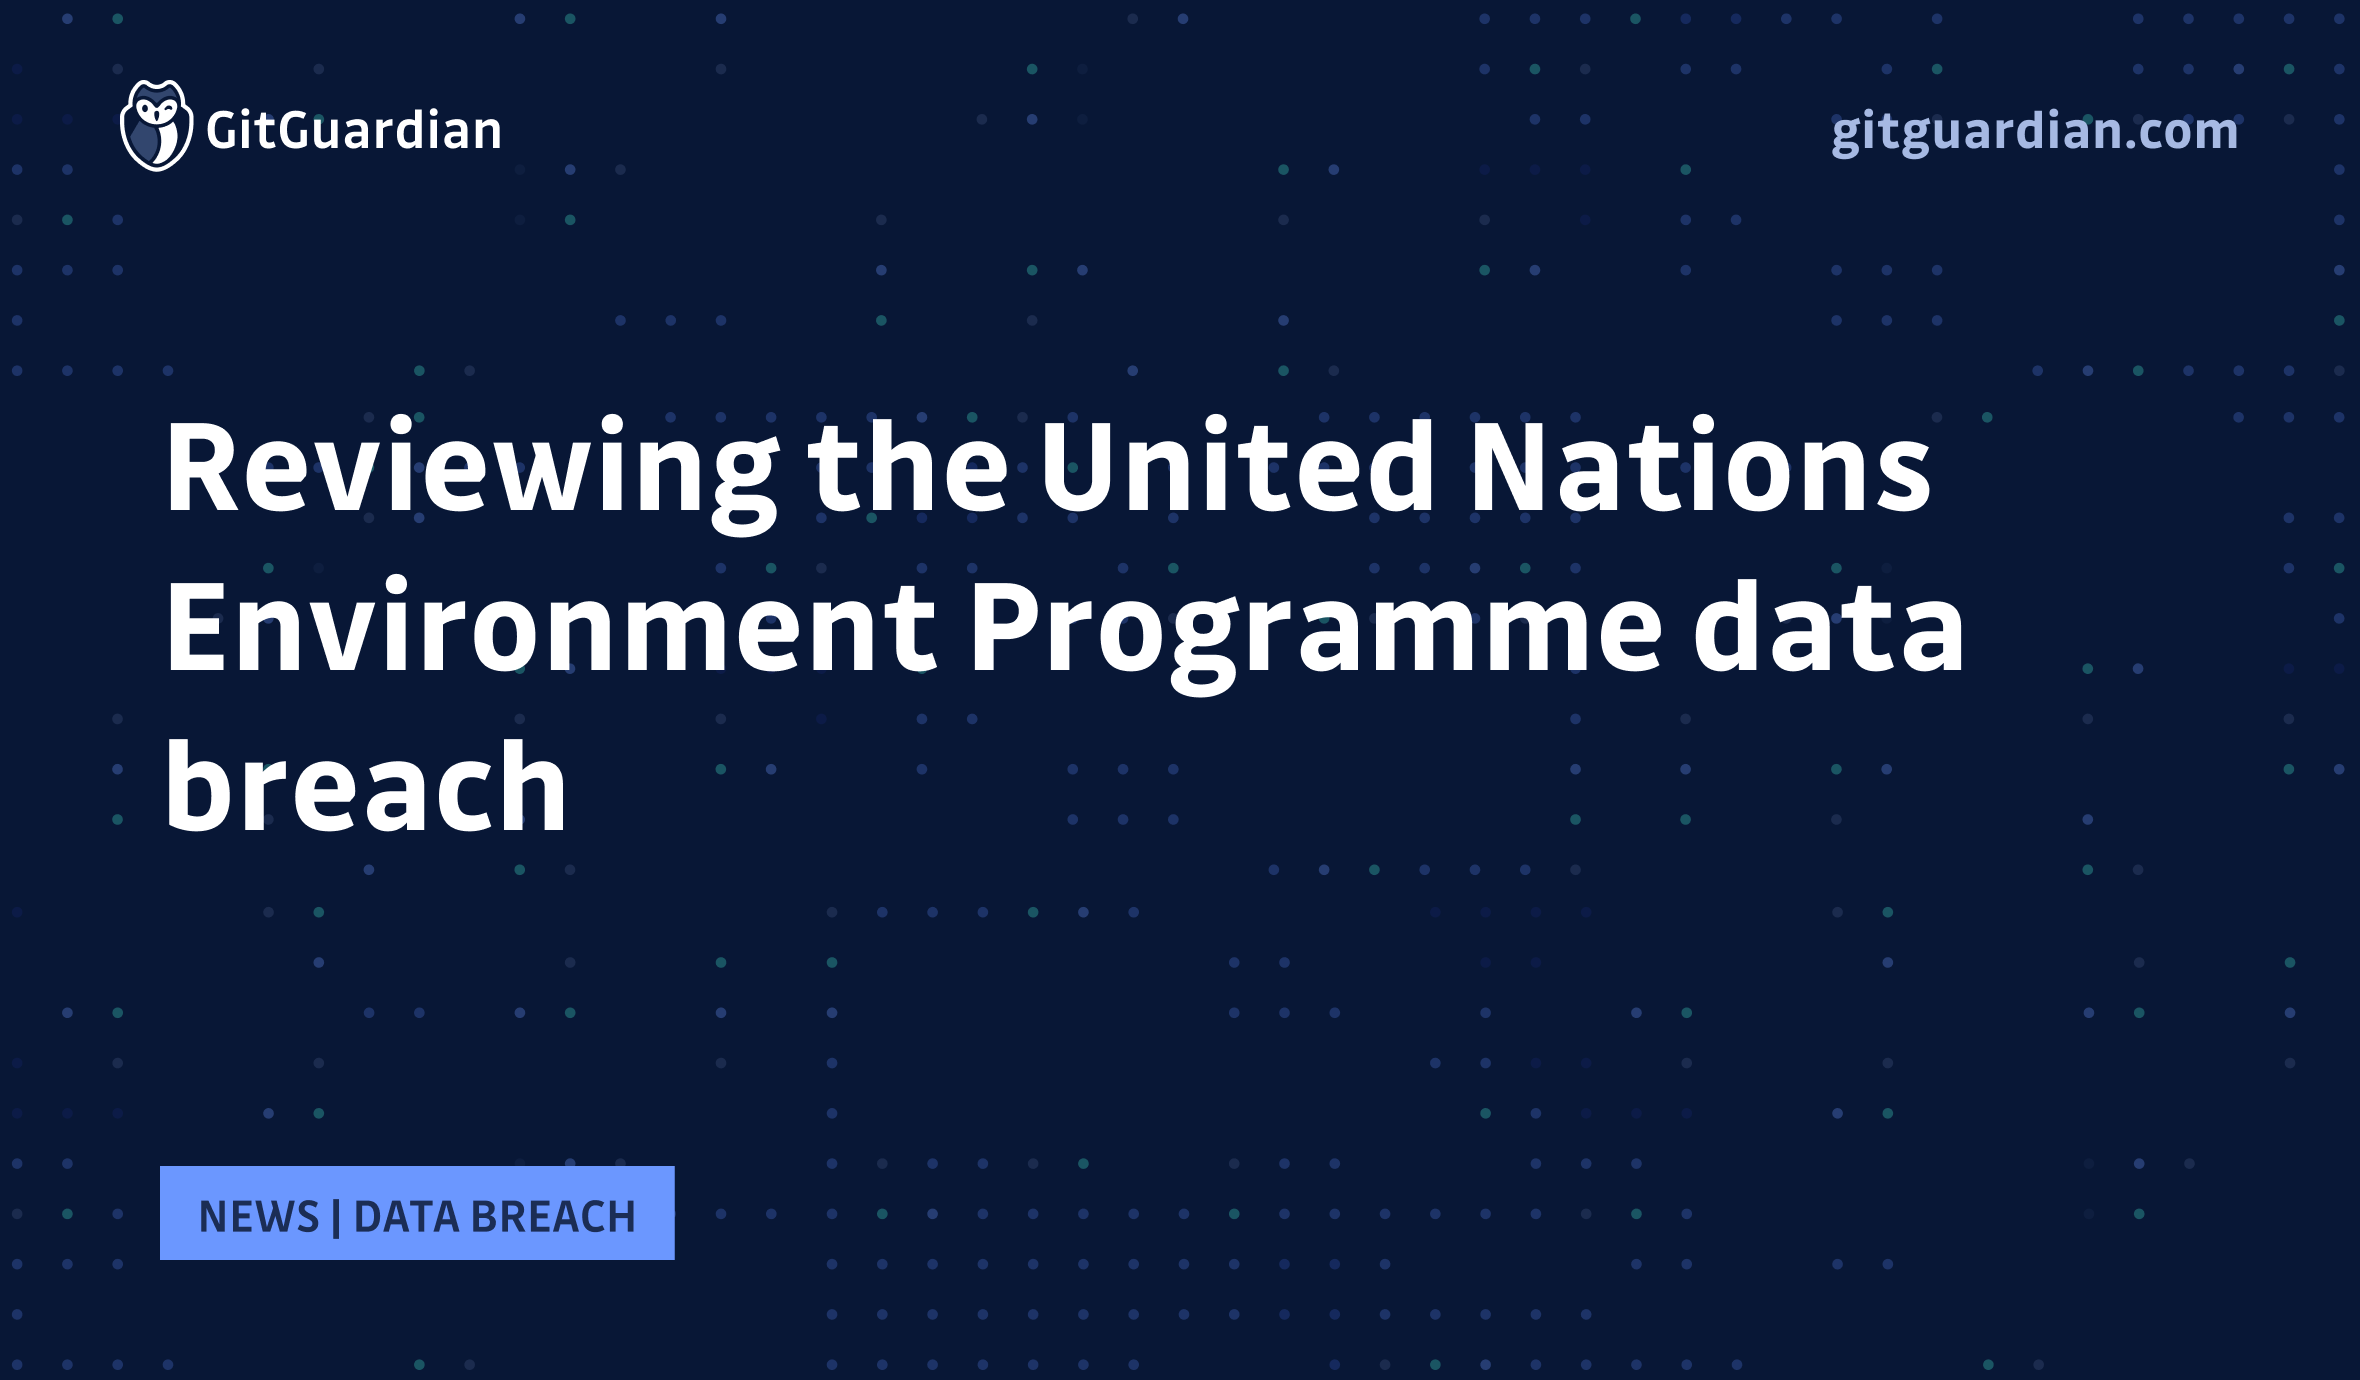 Reviewing the 2021 United Nations data breach